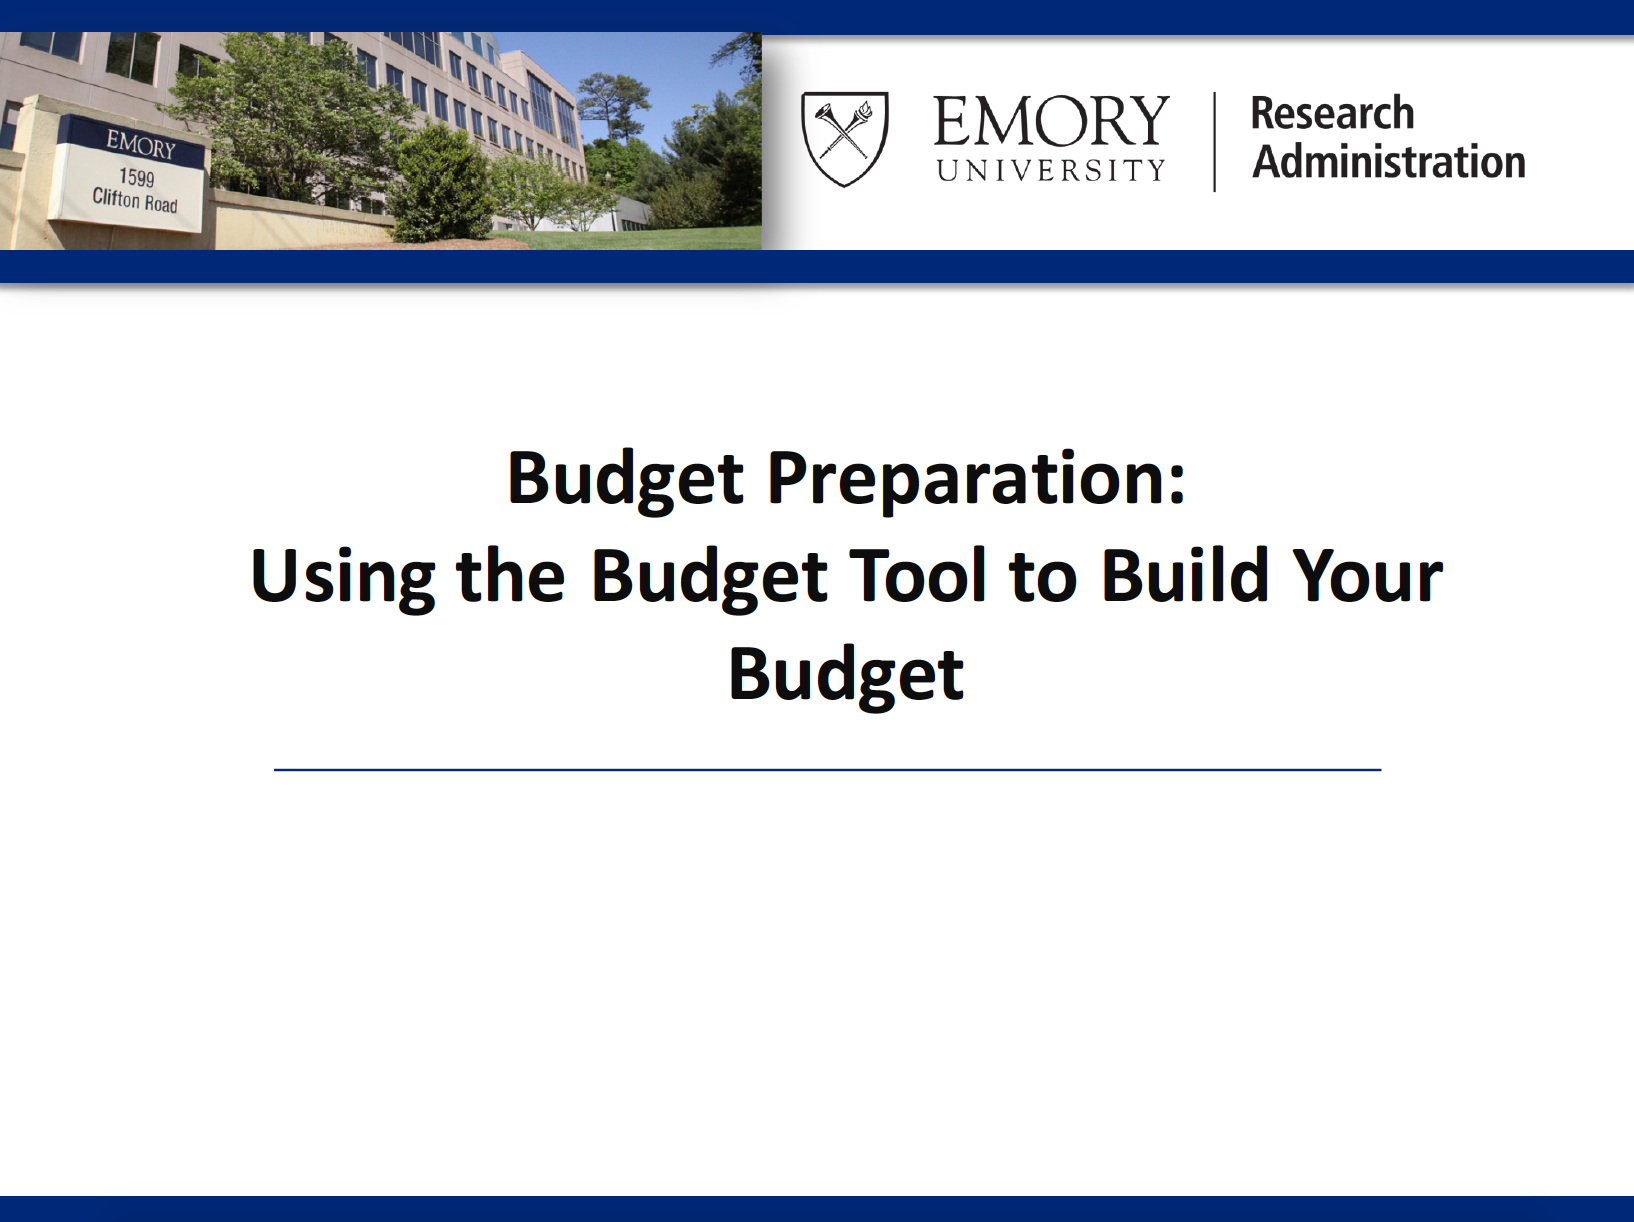 Budget Preparation: Using the budget tool to  build your budget